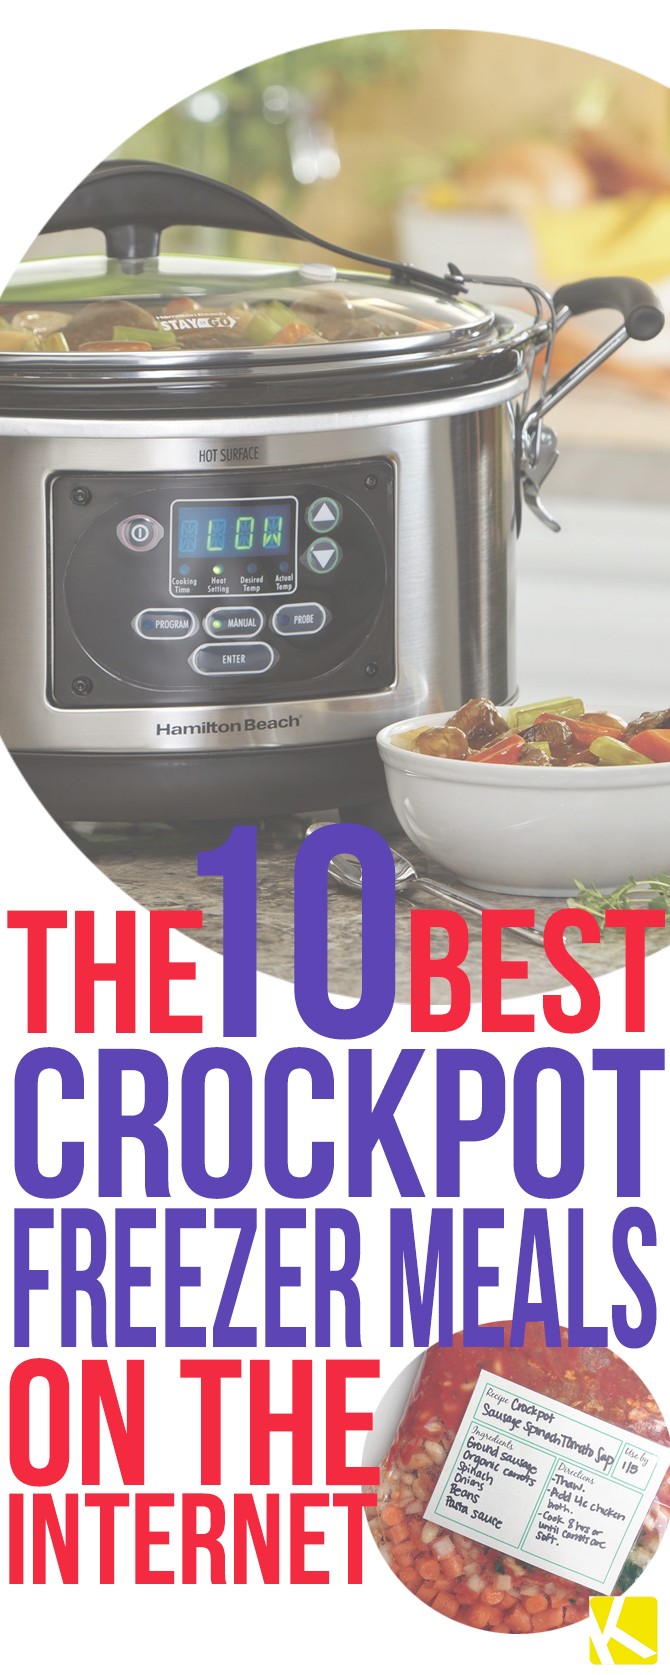 The 10 Best Crock-Pot Freezer Meals on the Internet - The Krazy Coupon Lady